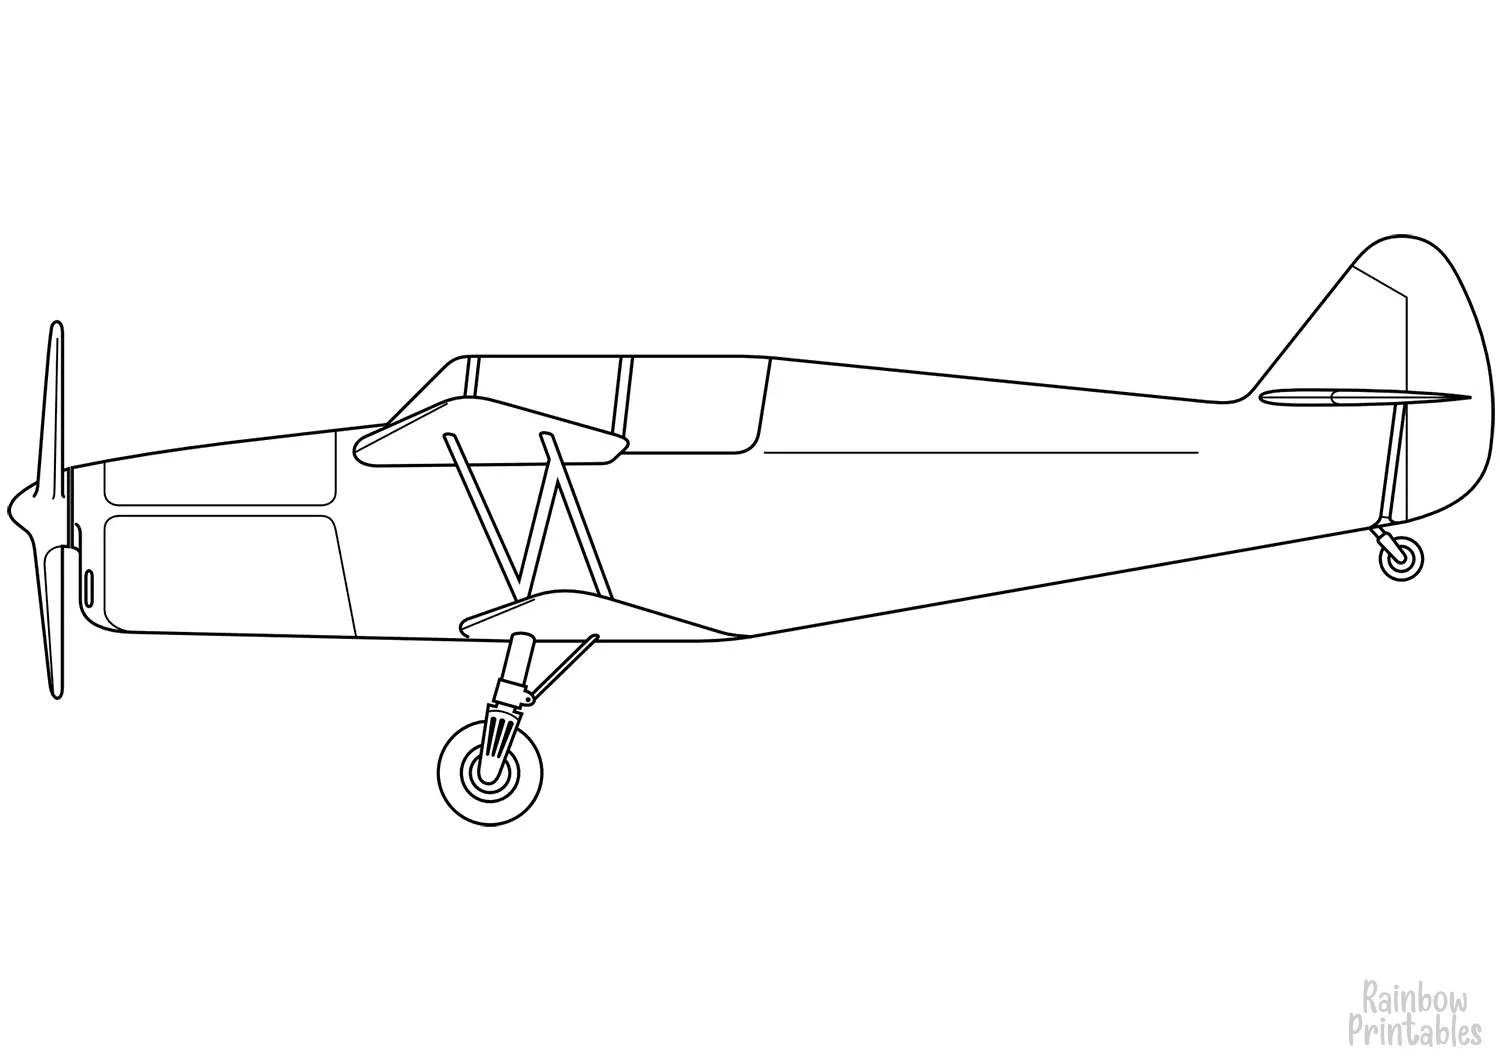 BIPLANE AIRPLANE Clipart Coloring Pages for Kids Adults Art Activities Line Art